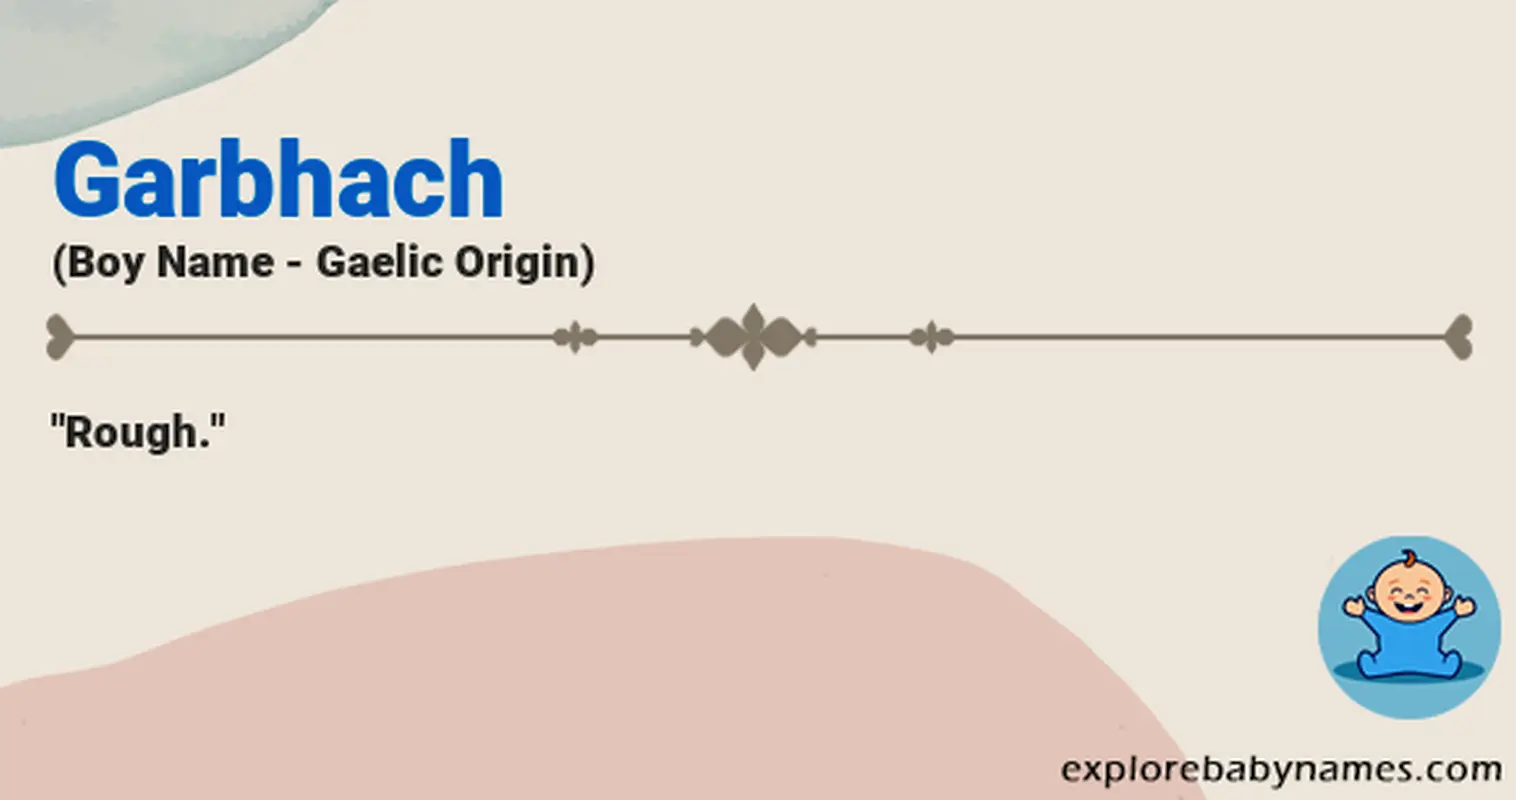 Meaning of Garbhach